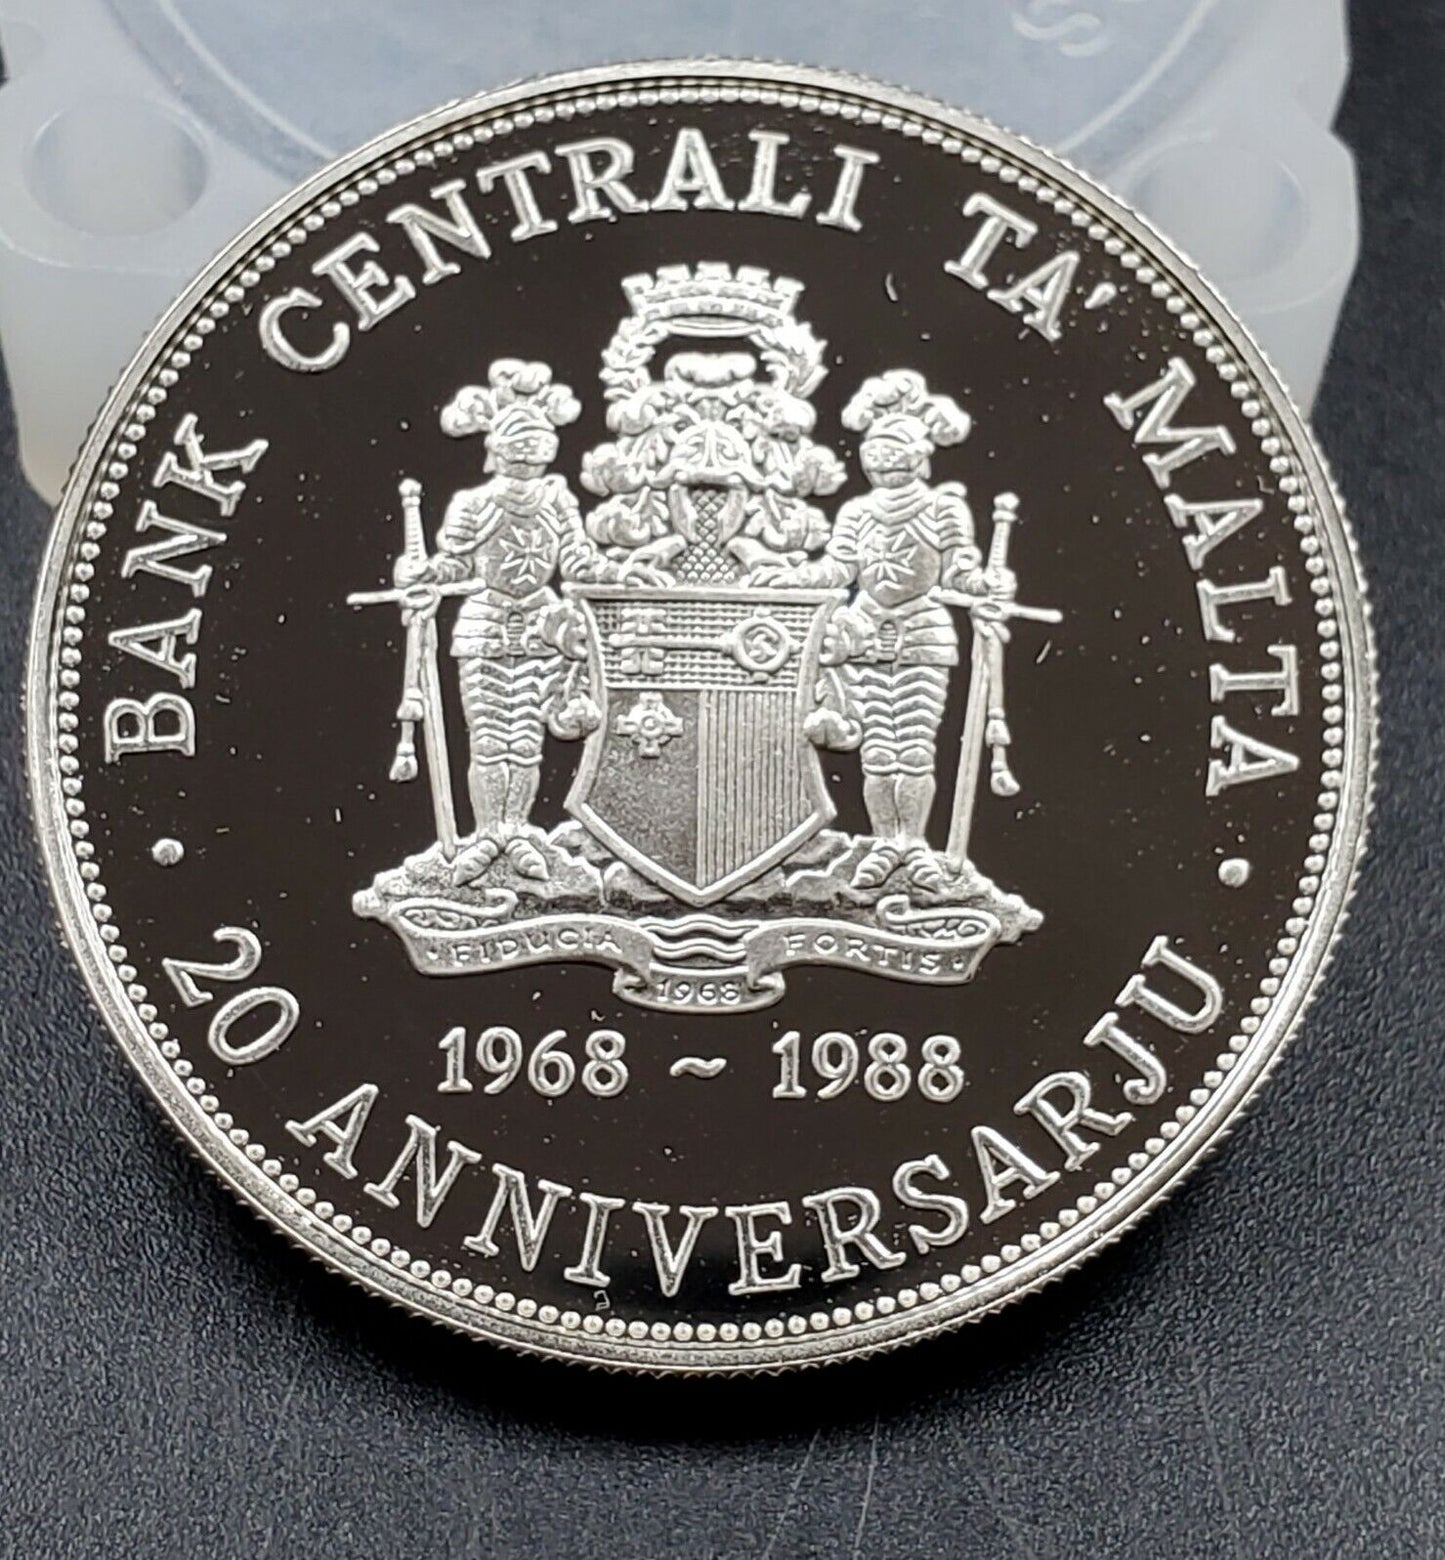 Malta 1988 Silver Coin Proof Lm5 20th Anniversary Central Bank PIEDFORD 2K MADE